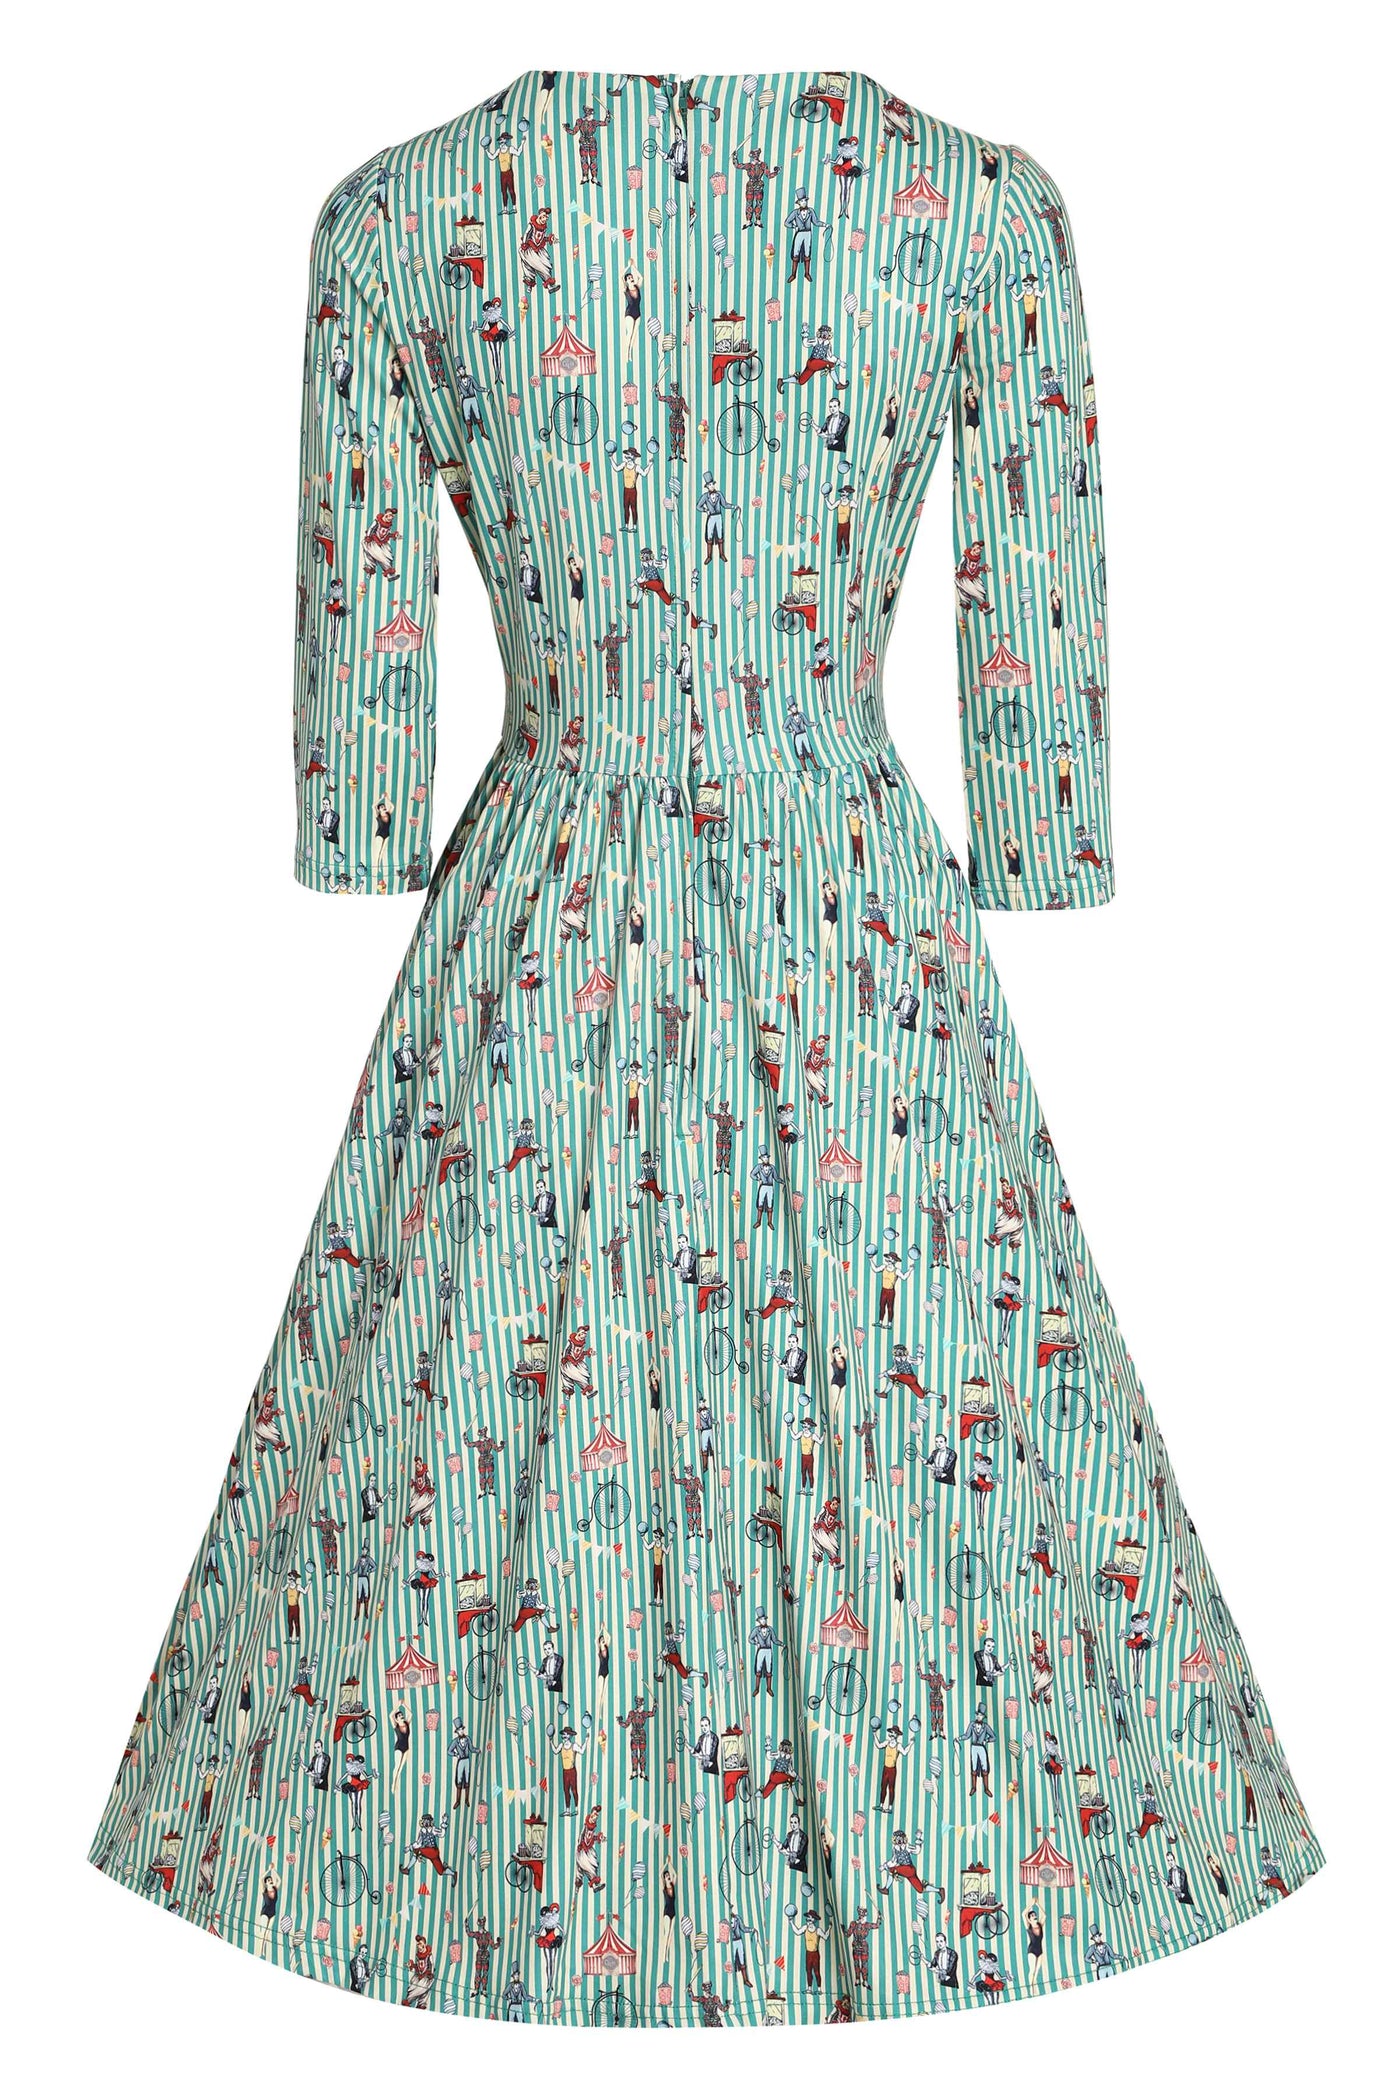 Back View of Circus Print with Stripes Long Sleeved Swing Dress in Green